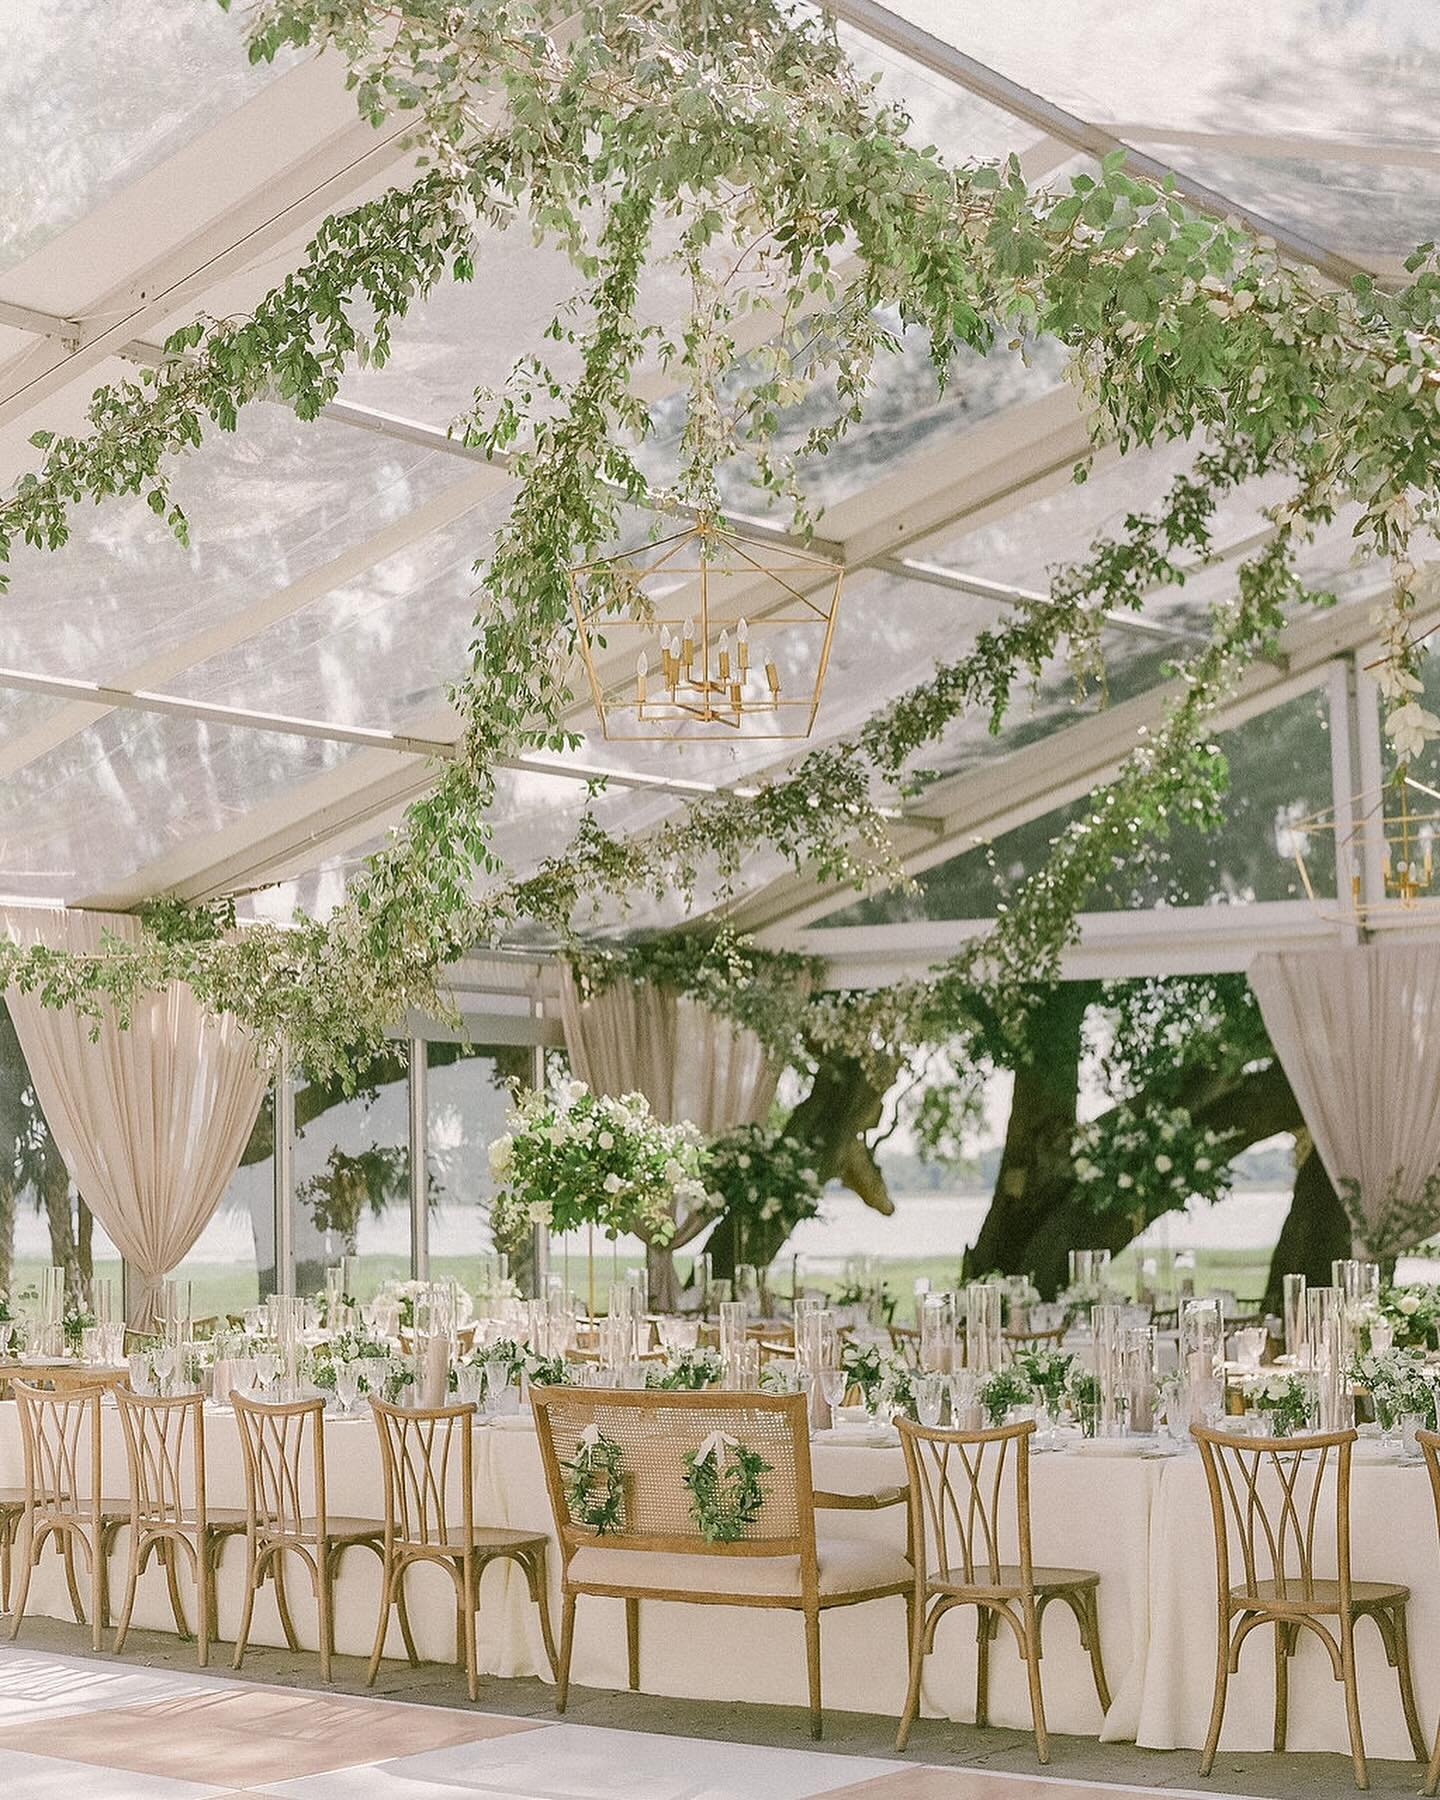 When the view is spectacular no matter your vantage point we consider it layout perfection!
.
.
.
Photo: @annerhettphotography 
Floral : @stephaniegibbsevents 
Stationery: @dearelouise 
Rentals: @eventworksrentals @curatedeventscharleston @snydereven